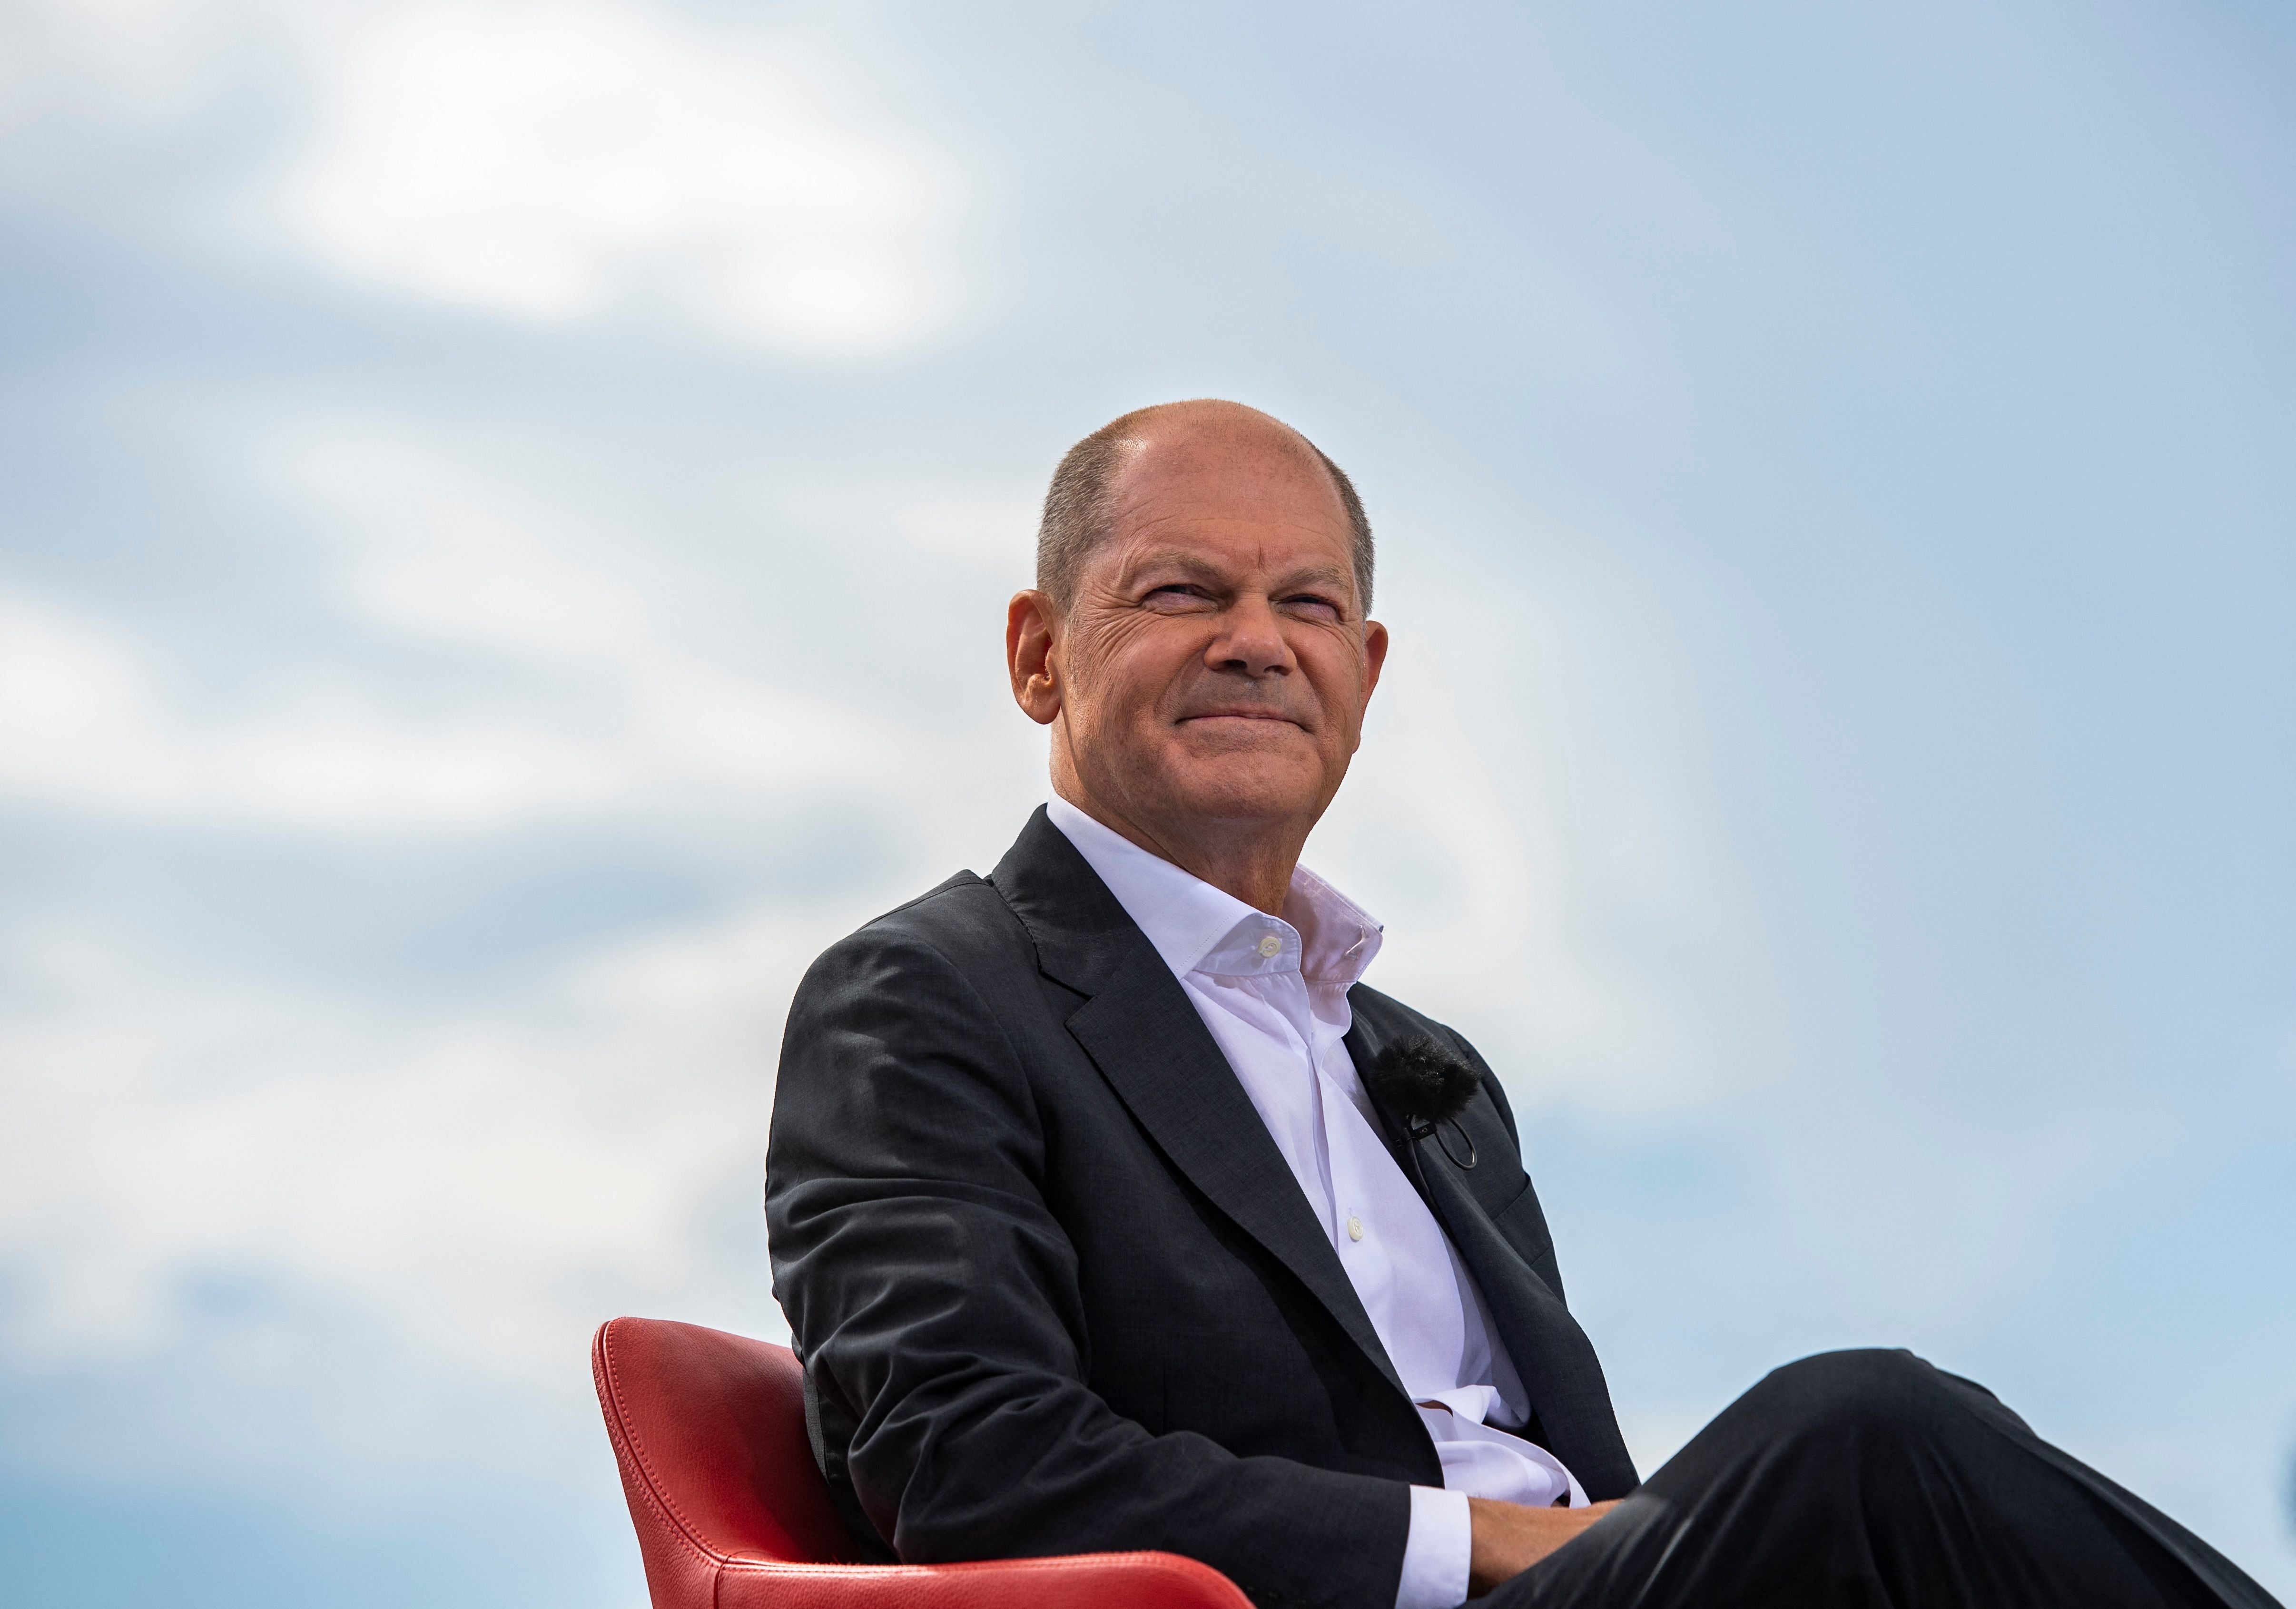 Seat of power: Olaf Scholz, leader of the socialist SPD